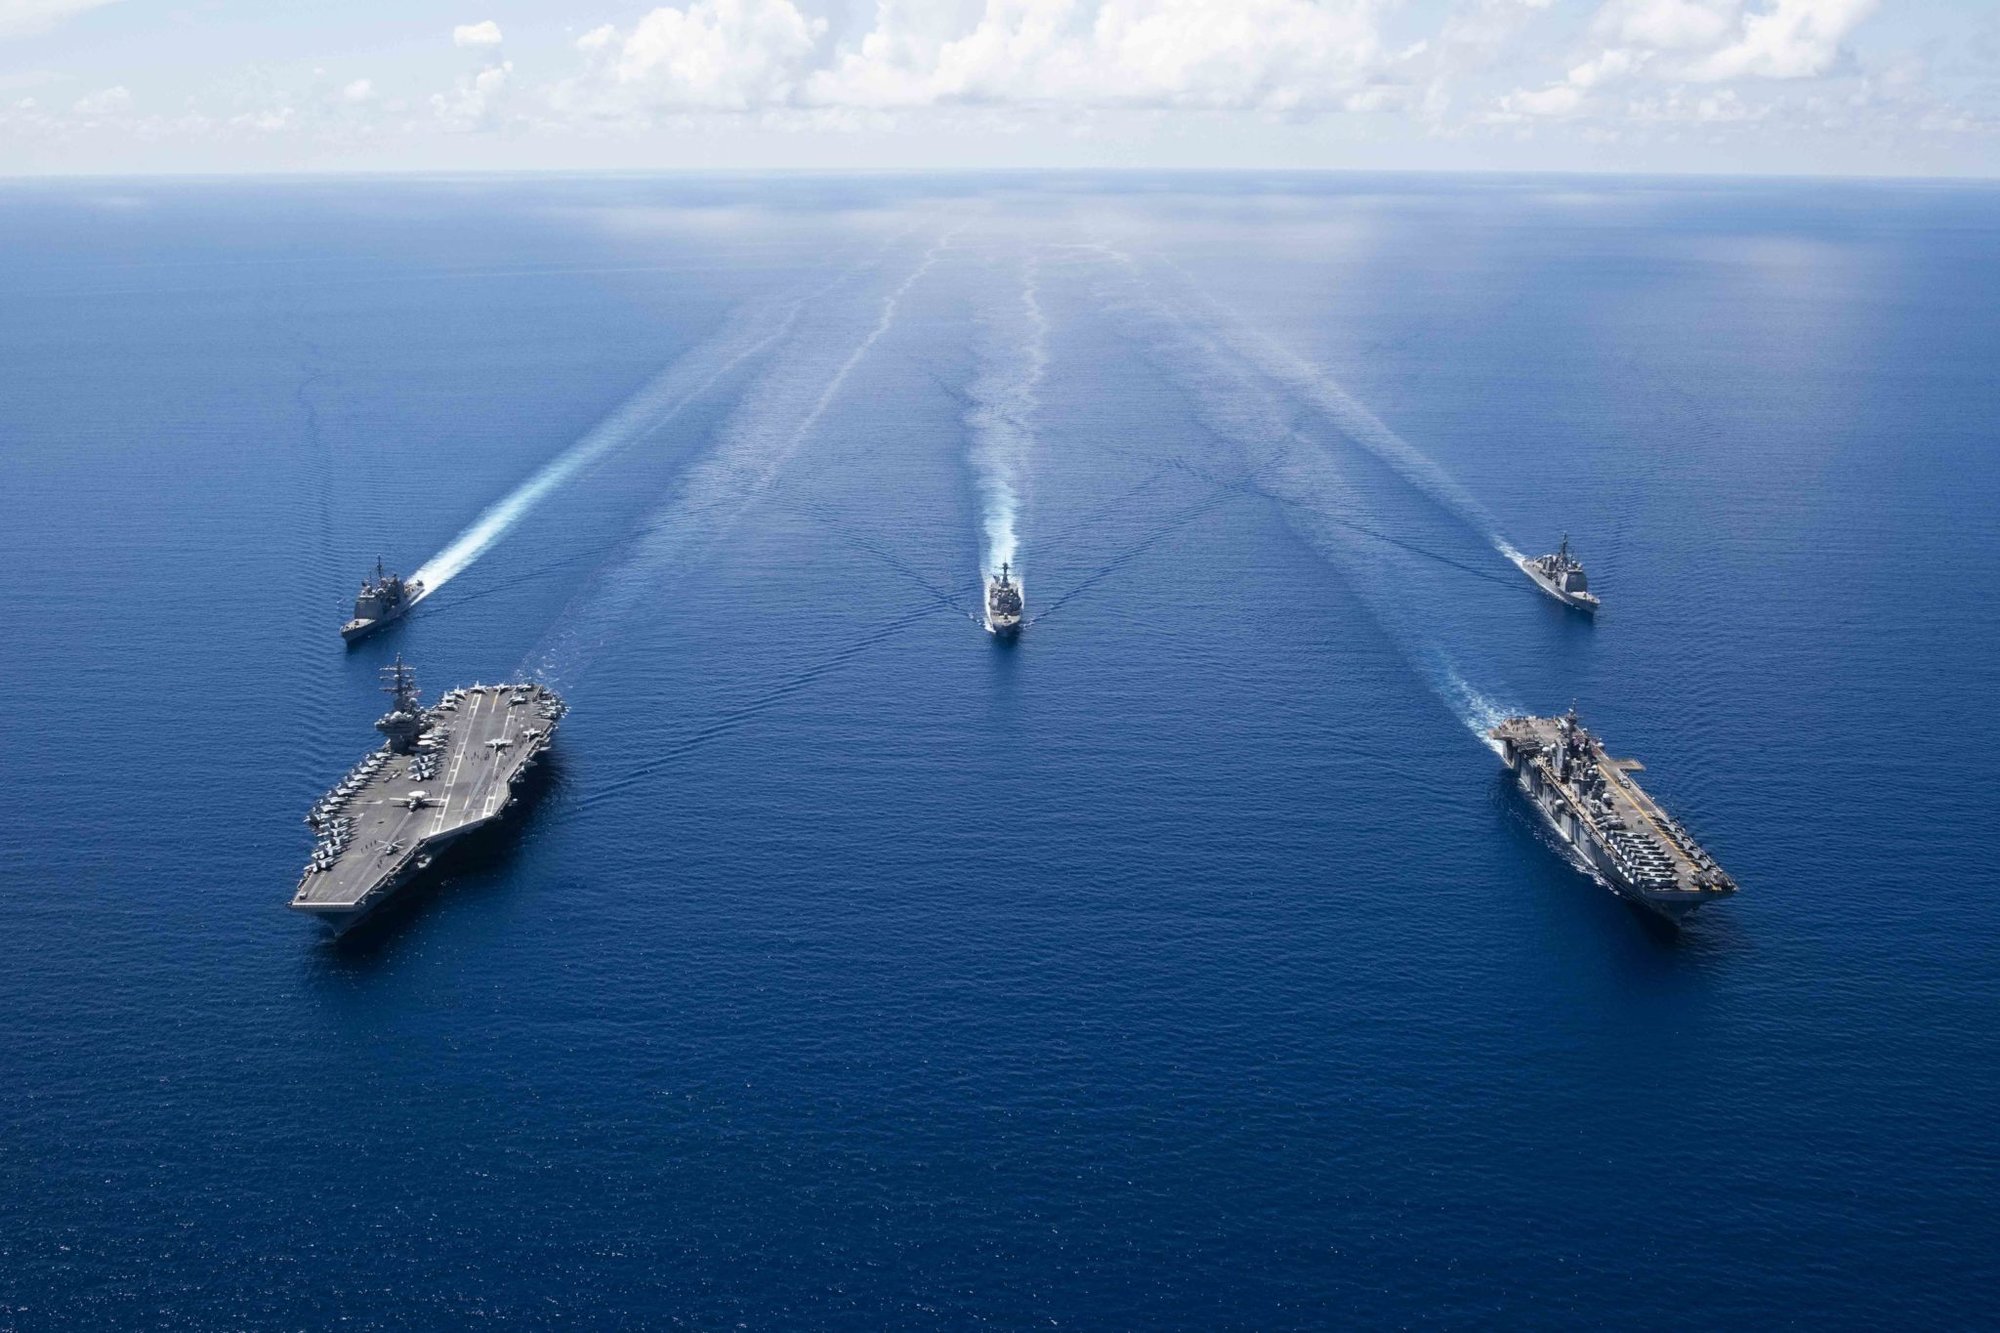 191006-N-VI515-0396 SOUTH CHINA SEA (October 6, 2019) Ships from Ronald Reagan Carrier Strike Group and Boxer Amphibious Ready Group sail in formation while conducting security and stability operations in the U.S. 7th Fleet area of operations. U.S. 7th Fleet is the largest numbered fleet in the world, and the U.S. Navy has operated in the Indo-Pacific region for more than 70 years, providing credible, ready forces to help preserve peace and prevent conflict. (U.S. Navy photo by Mass Communication Specialist 2nd Class Erwin Jacob V. Miciano)